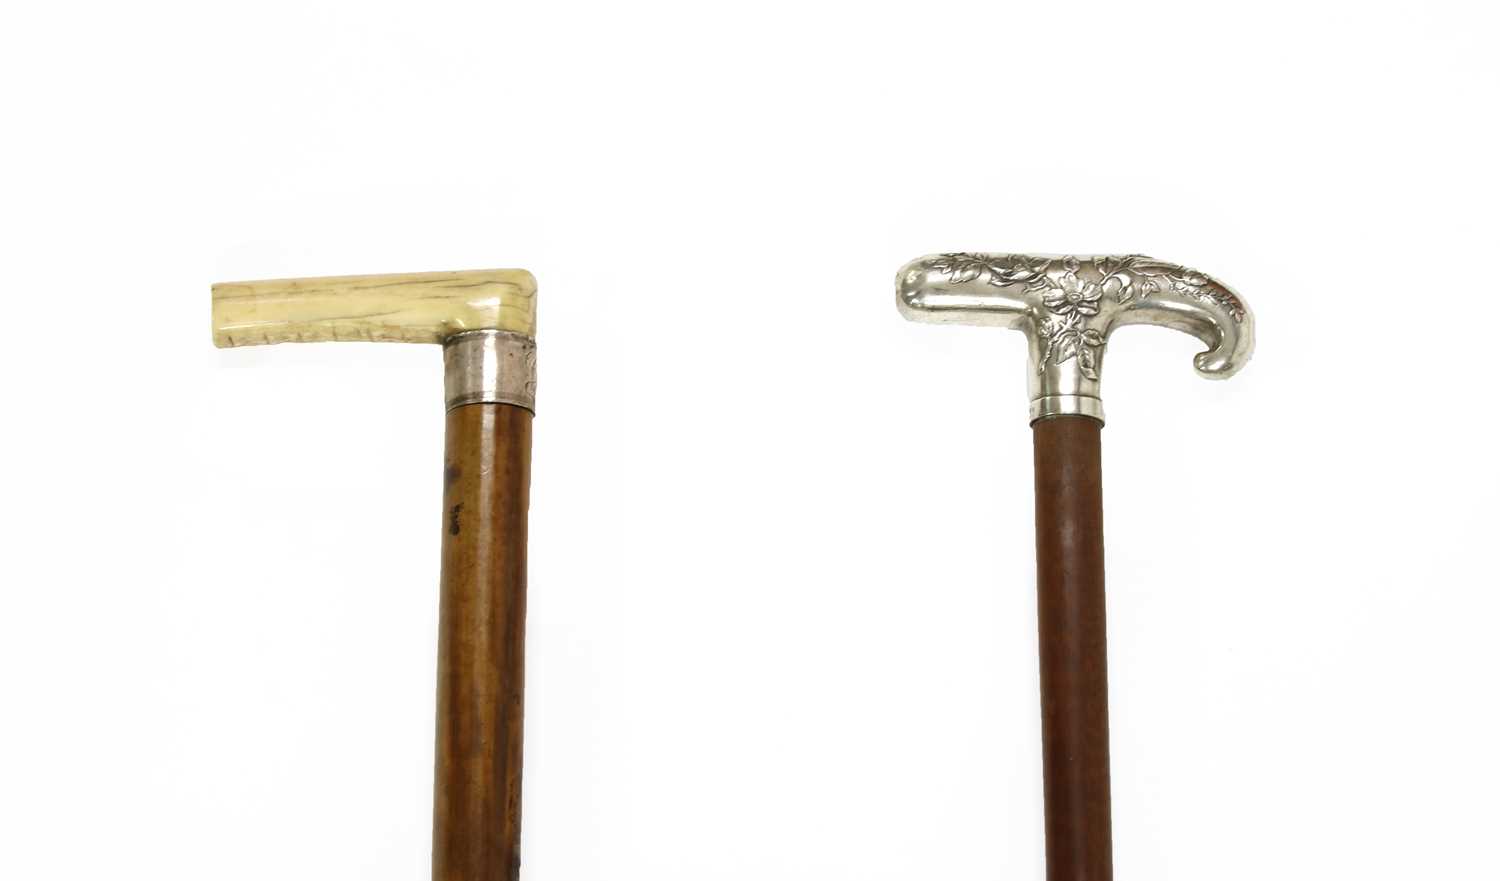 A 19th century walking stick, - Image 2 of 2